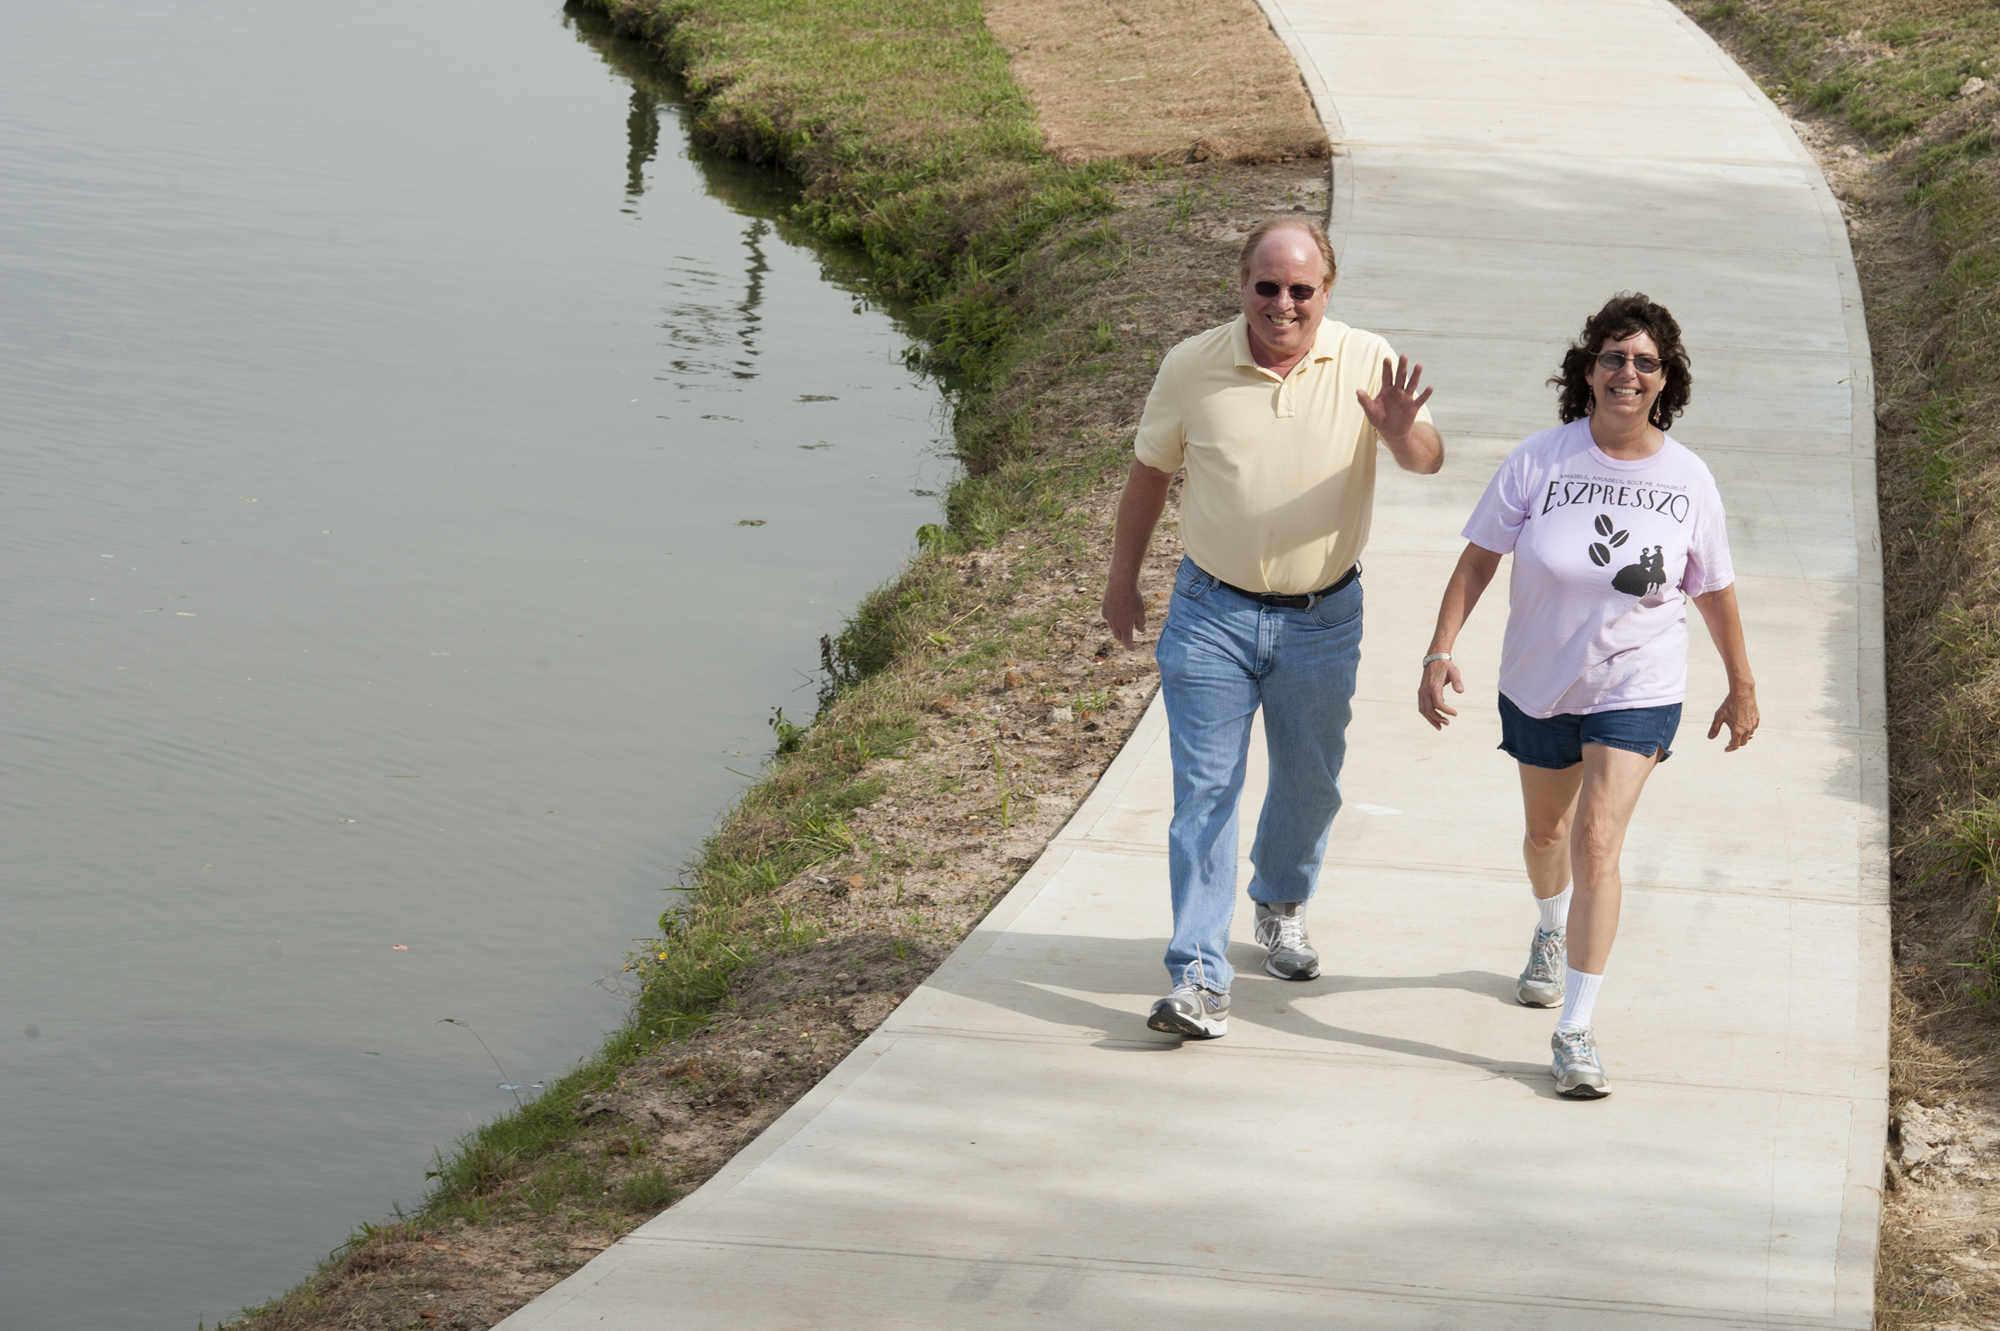 Len and Vivien Miller, husband-and-wife walking partners, who both are MSU math professors, frequently make use of the walking track around Chadwick Lake, as well as the adjacent Sanderson Center.